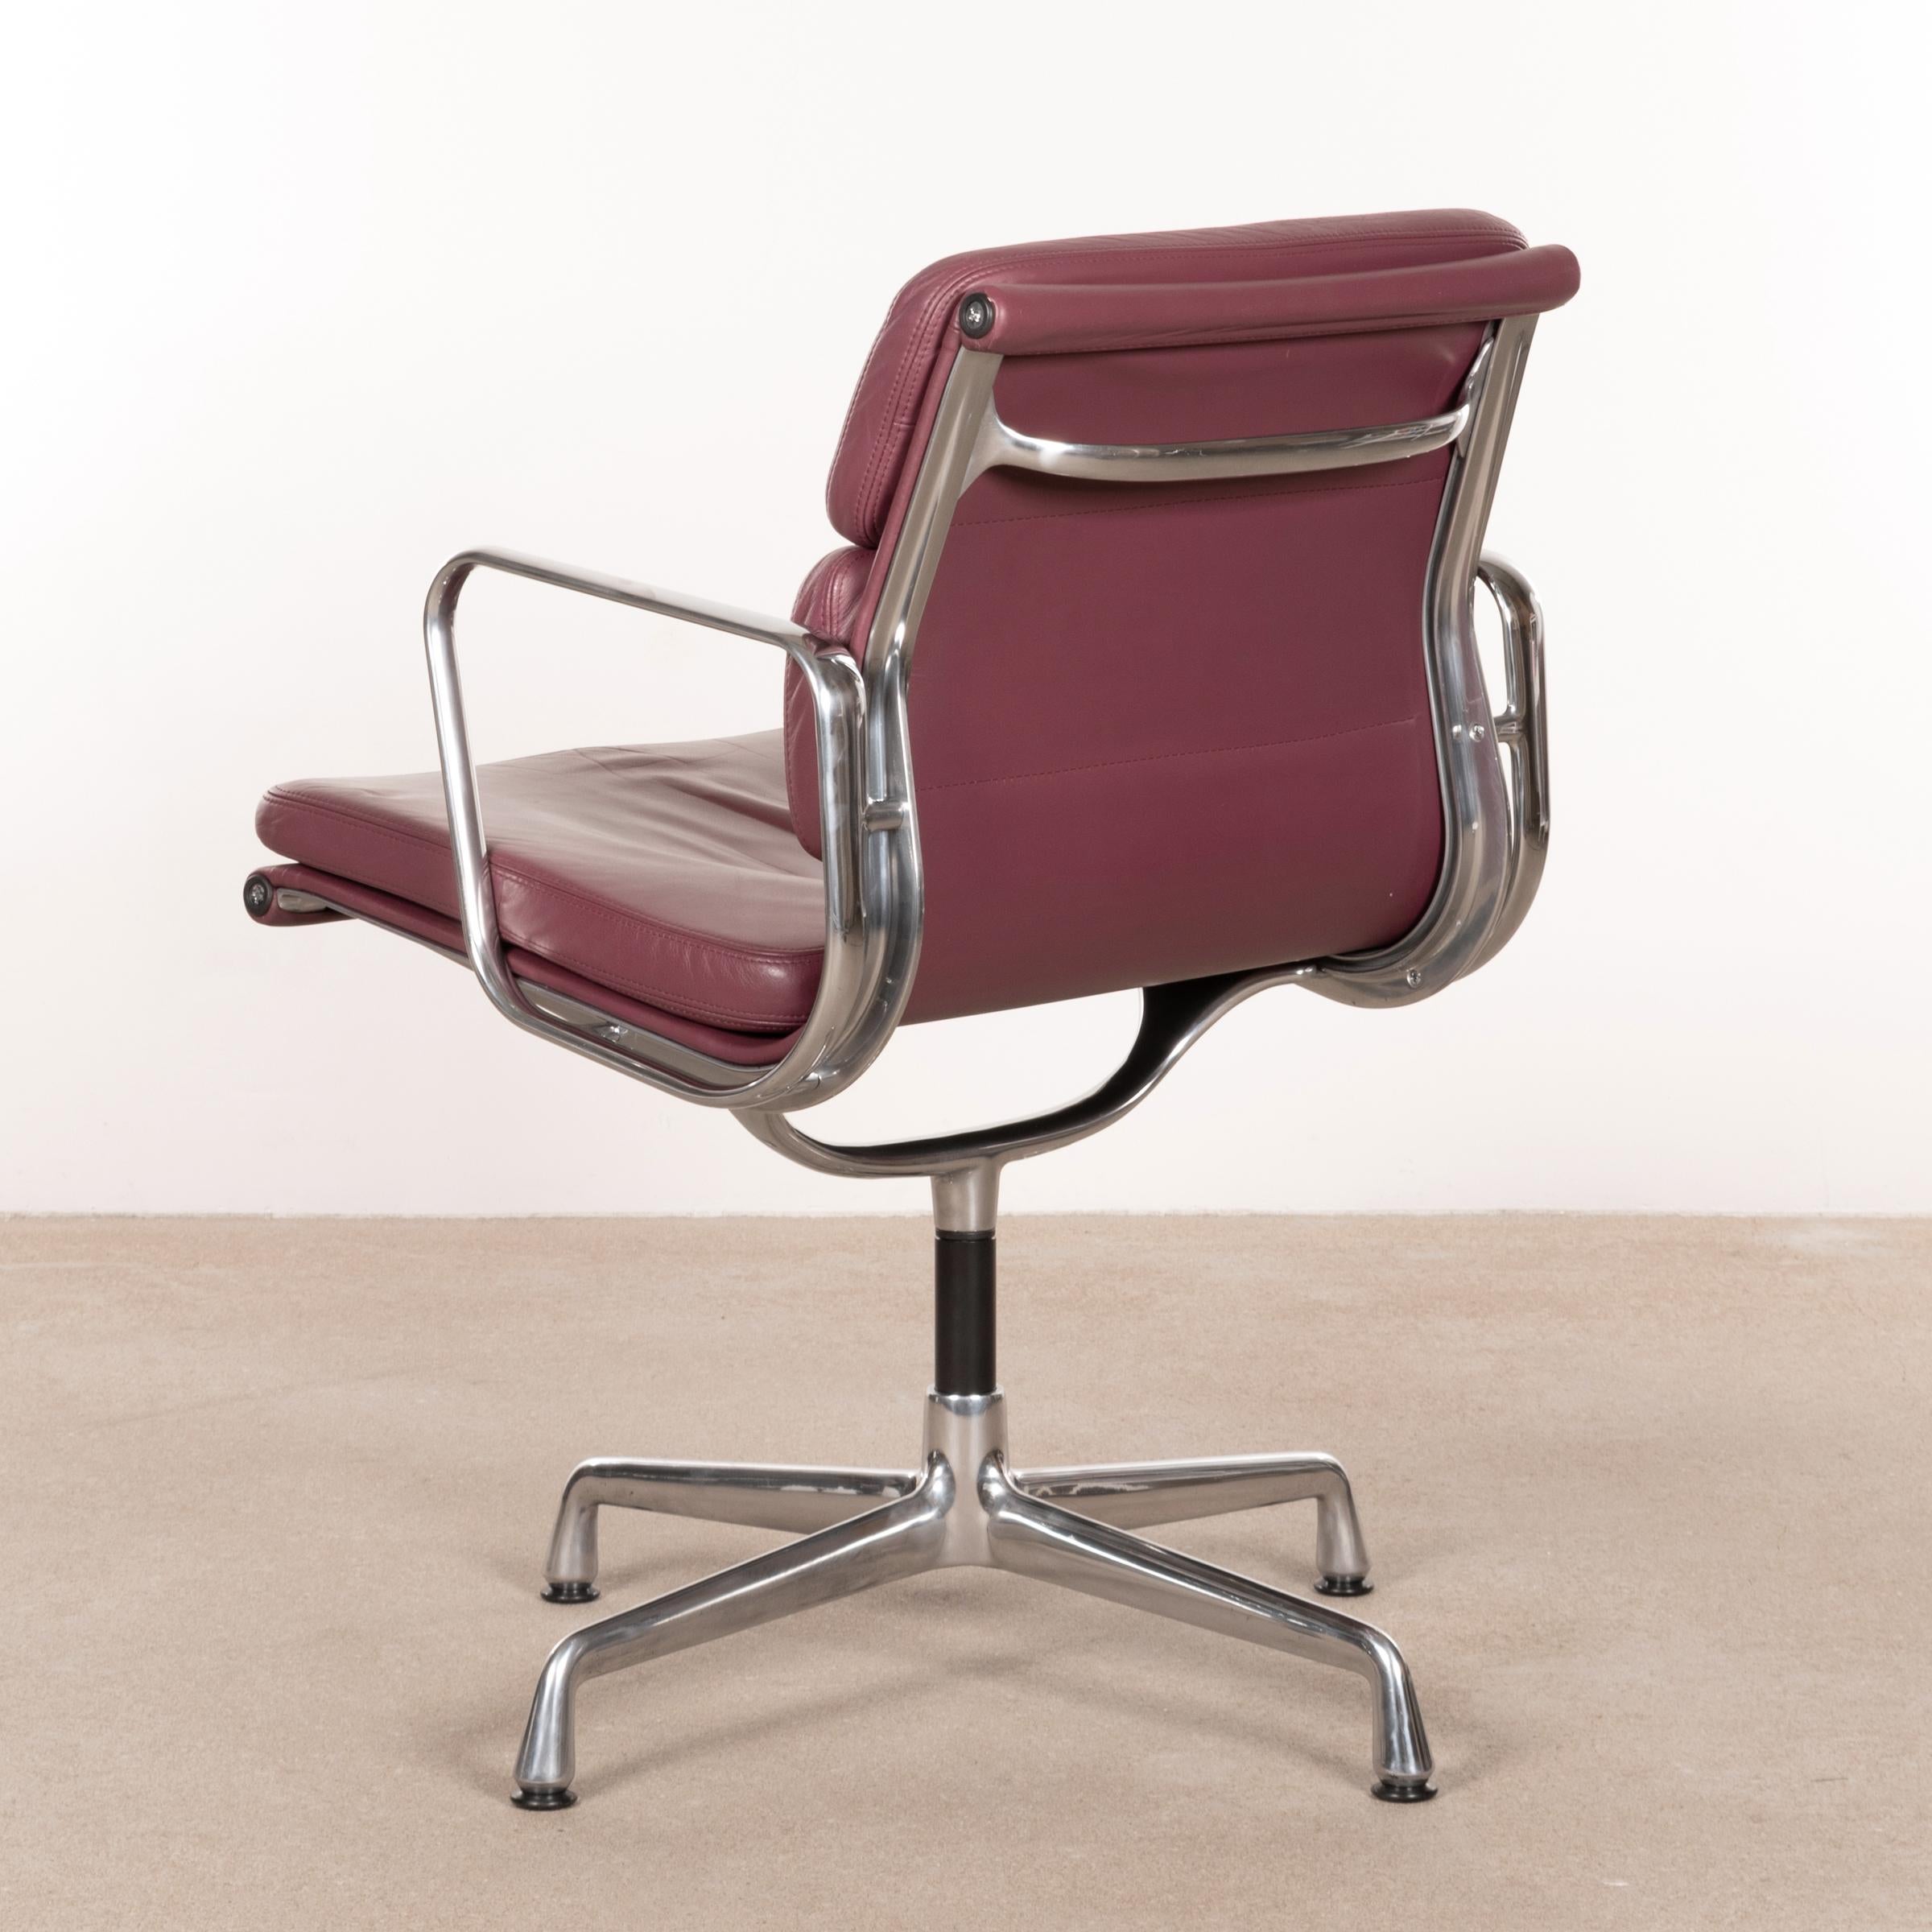 Comfortable Soft Pad chairs designed by Charles & Ray Eames in 1969 and manufactured by Vitra. Polished aluminum frames with swivel function with leather cushions in an aubergine / purple tone. Backside also in leather which is optional in this